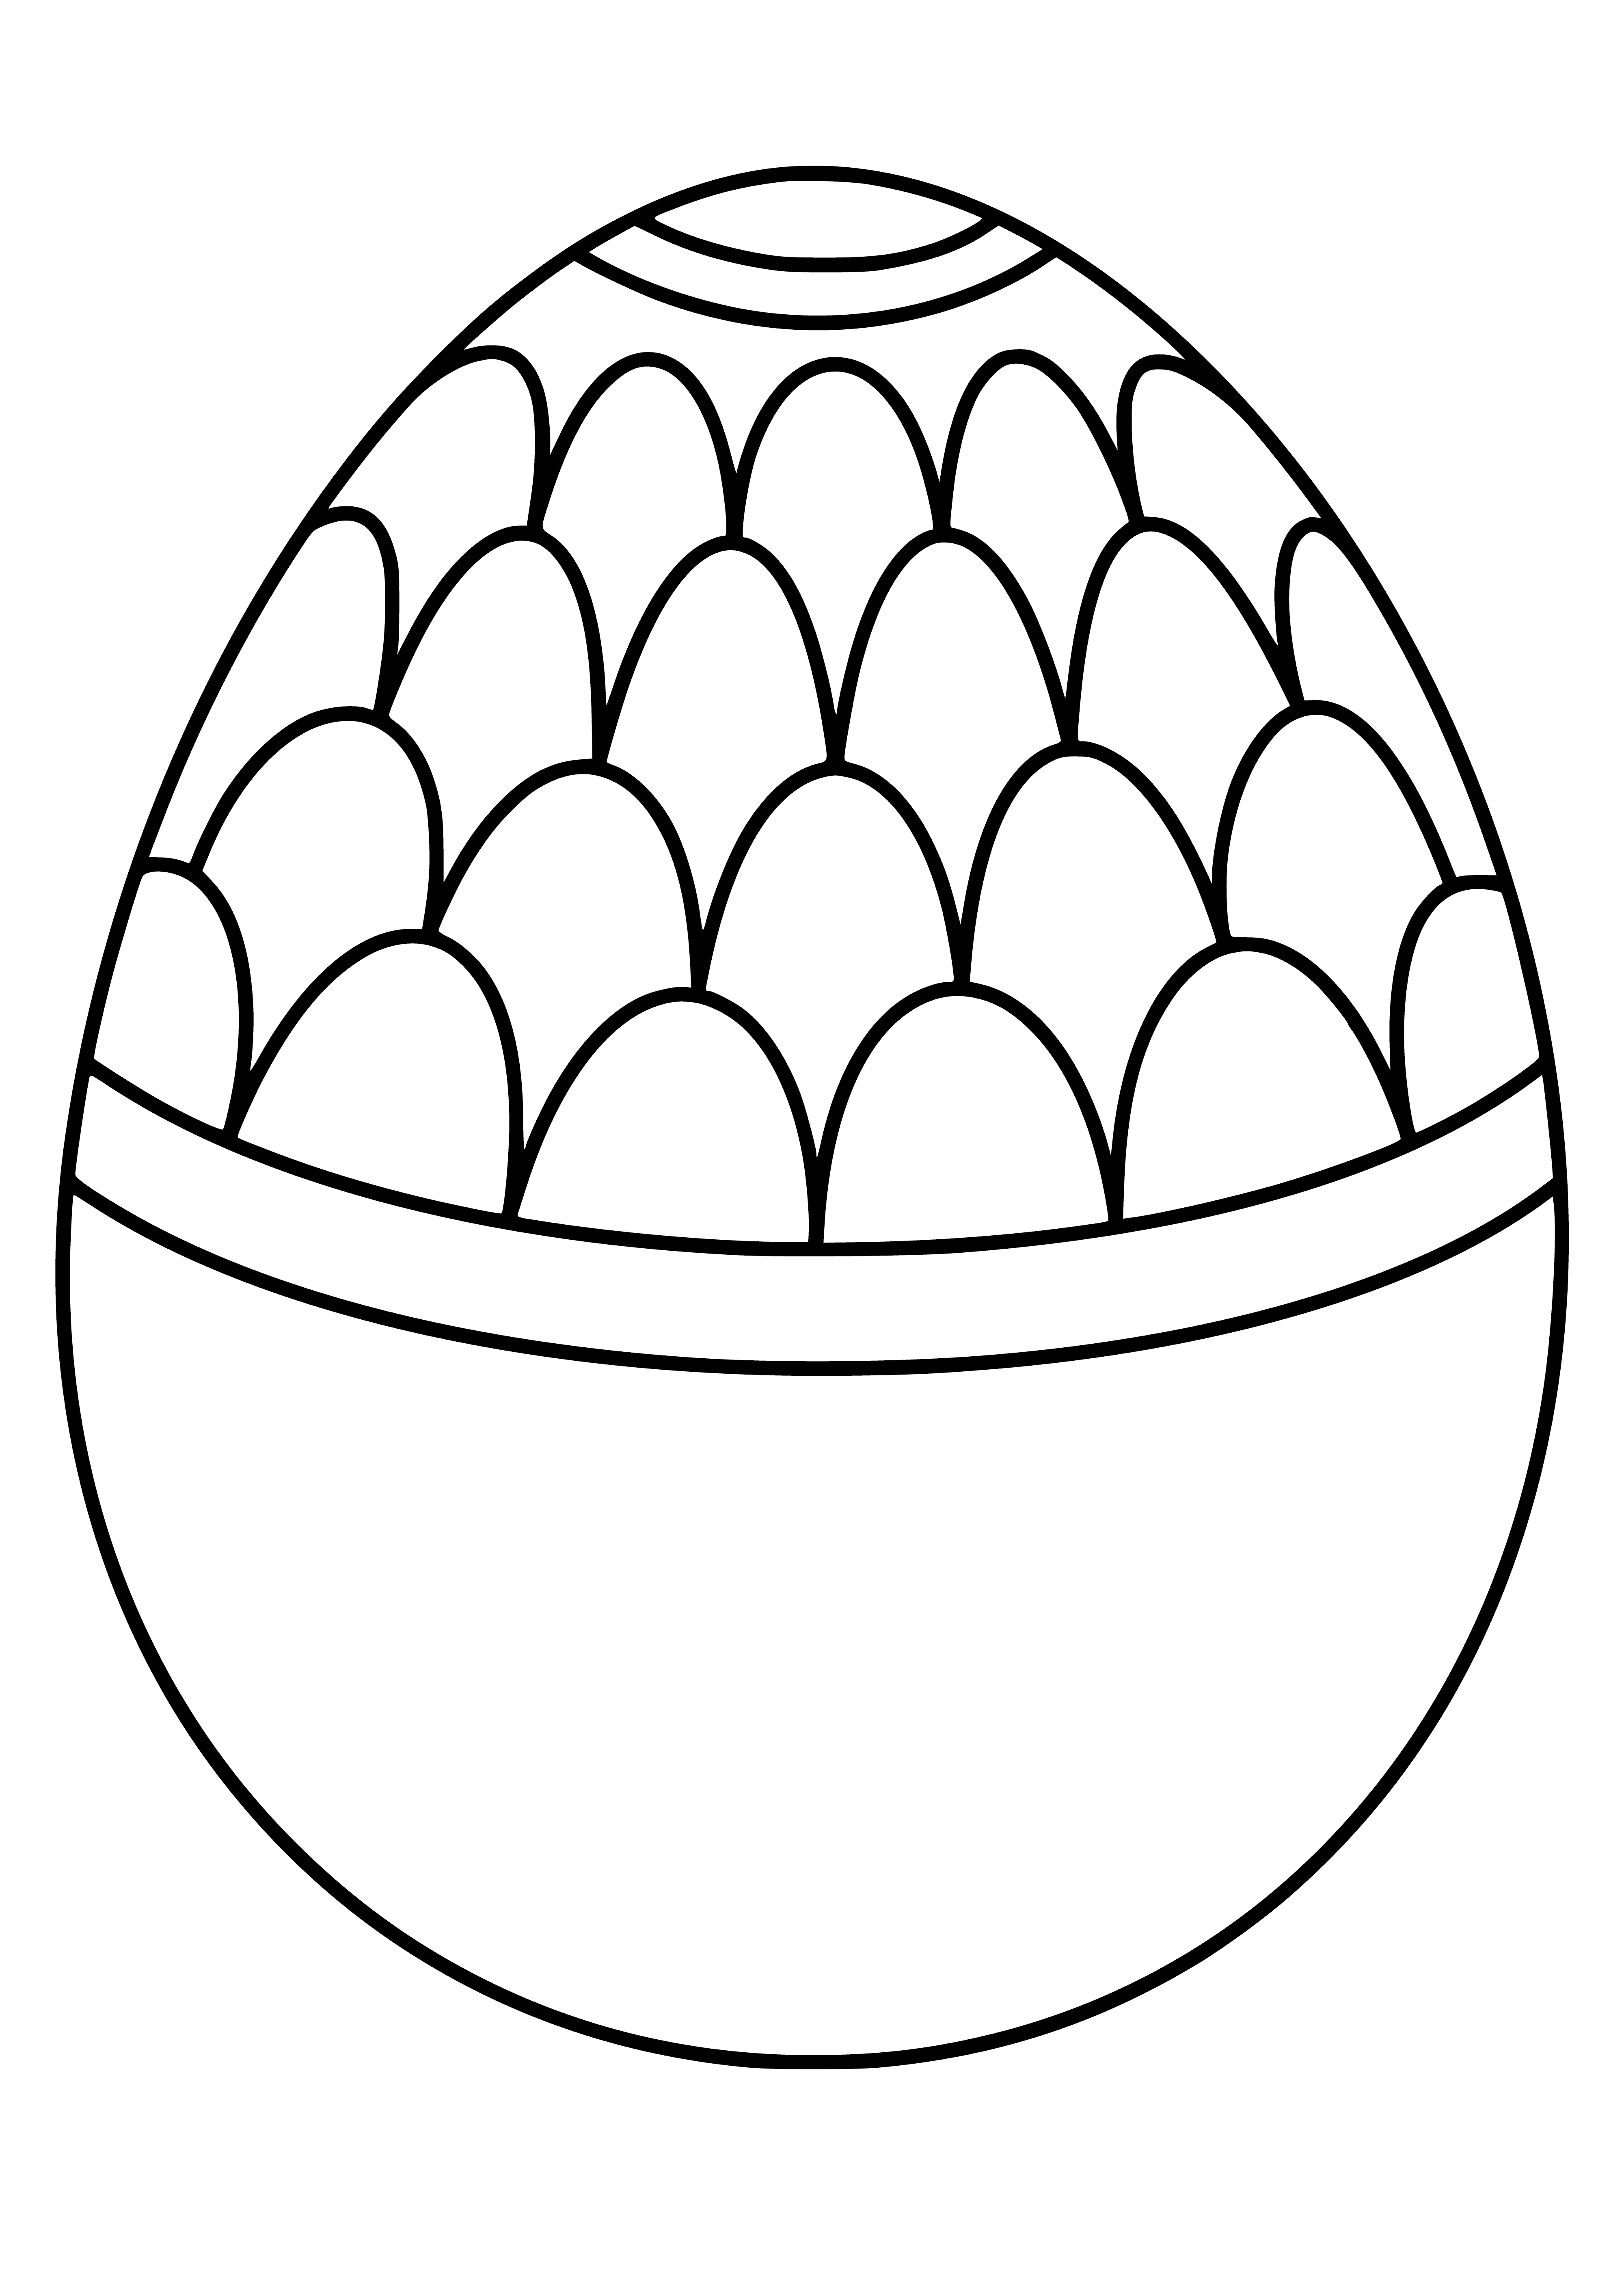 coloring page: Giant chocolate egg on nest, surrounded by four smaller eggs - 3 blue, 1 pink, all have white trim.